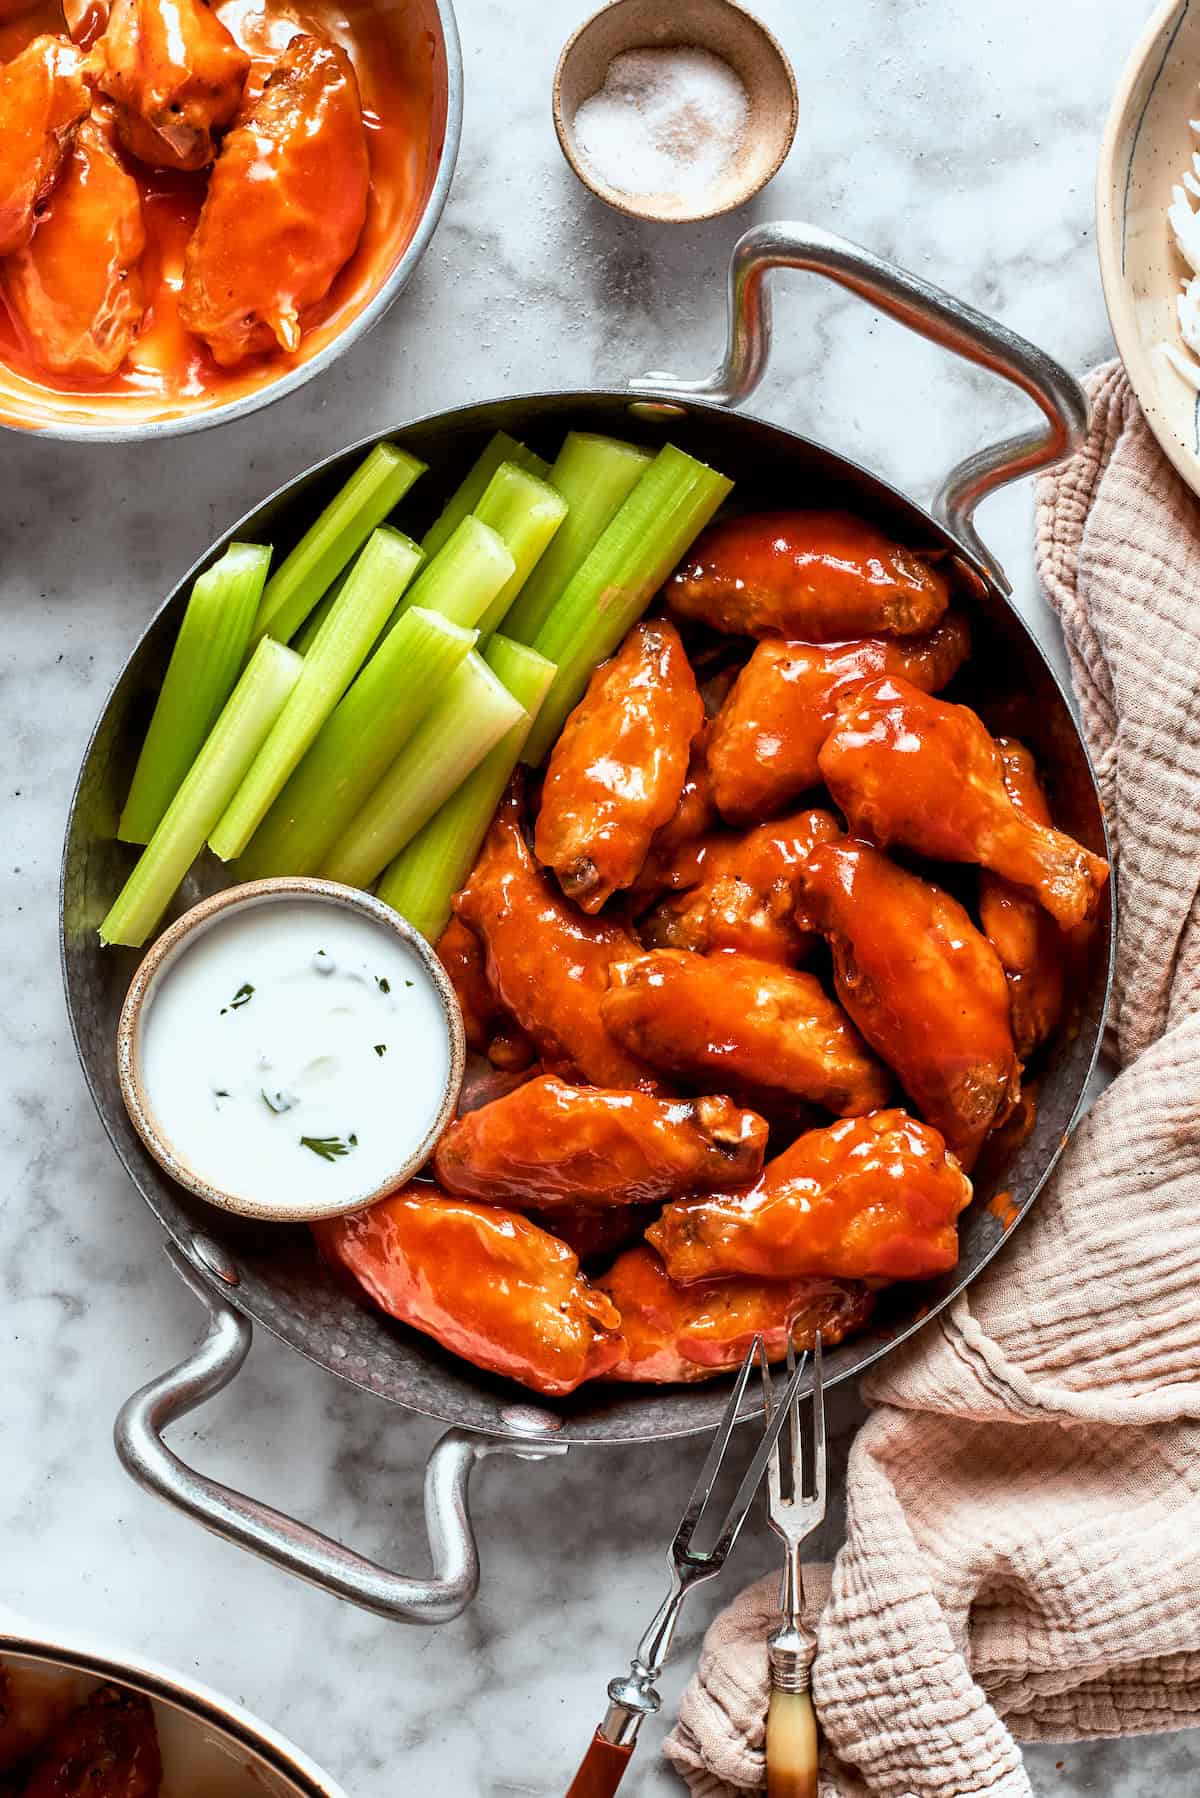 A view of a table holding a towel and a pan with buffalo wings, sauce, and celery.